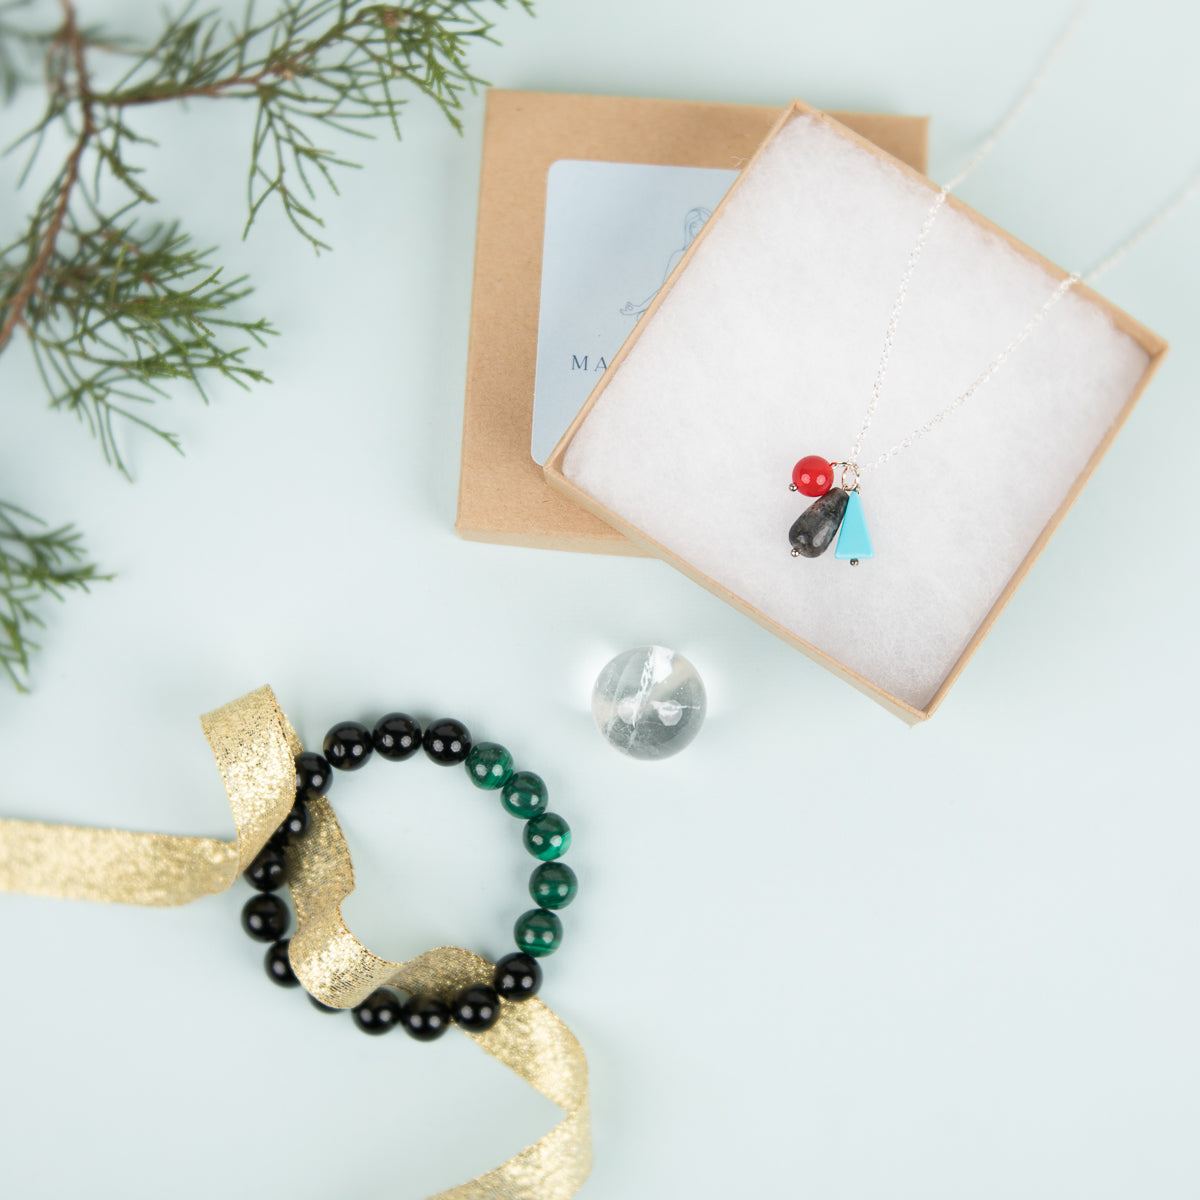 Holiday Harmony - Manifestation Box - Compassionate Living Practice. Gemstone Jewelry & Tools for a Mindful Lifestyle - Sign up for the  Manifestation Box and receive the monthly box of crystal healing and save!